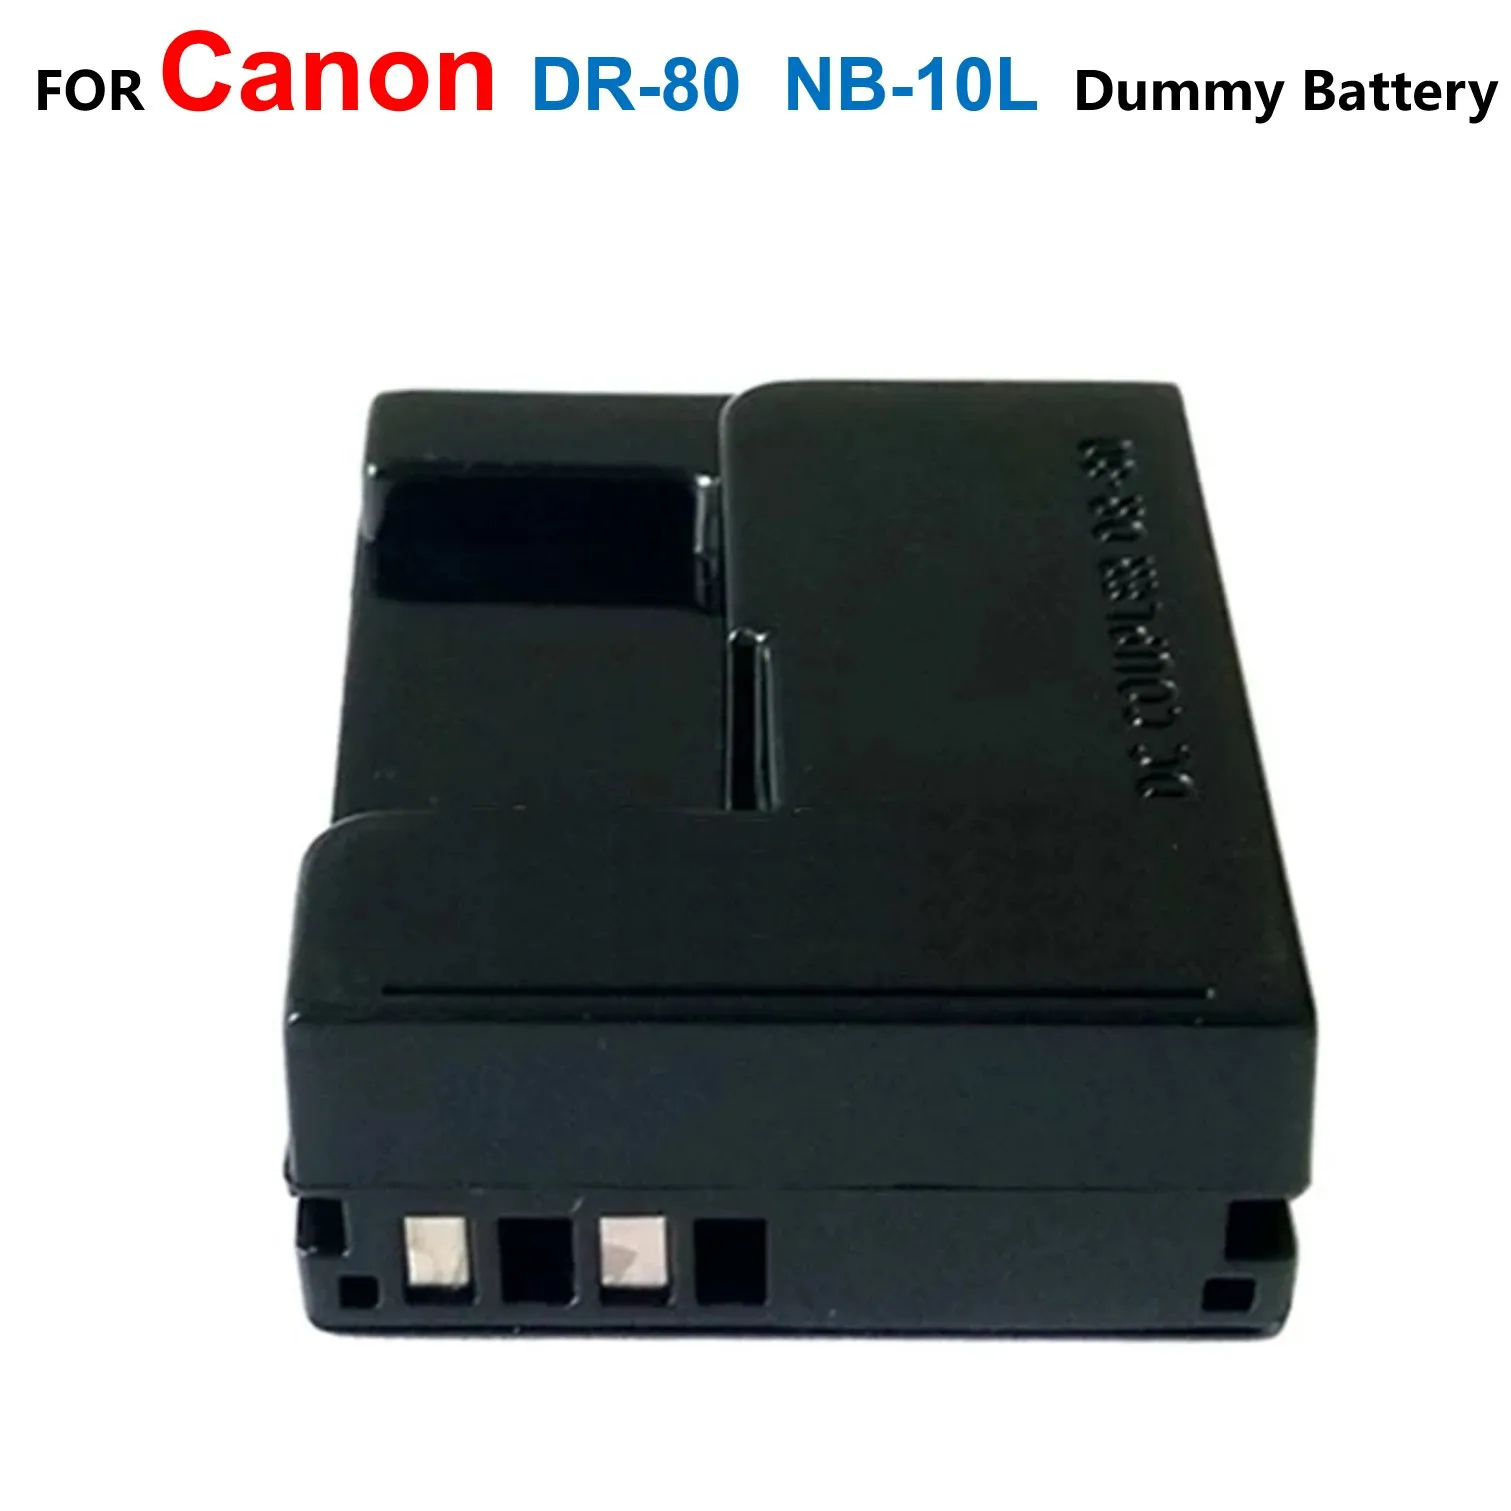 

NB-10L NB10L Dummy Battery Fit Power Adapter DR80 DR-80 DC Coupler For Canon PowerShot G1X G15 G16 SX40 SX50 and SX60